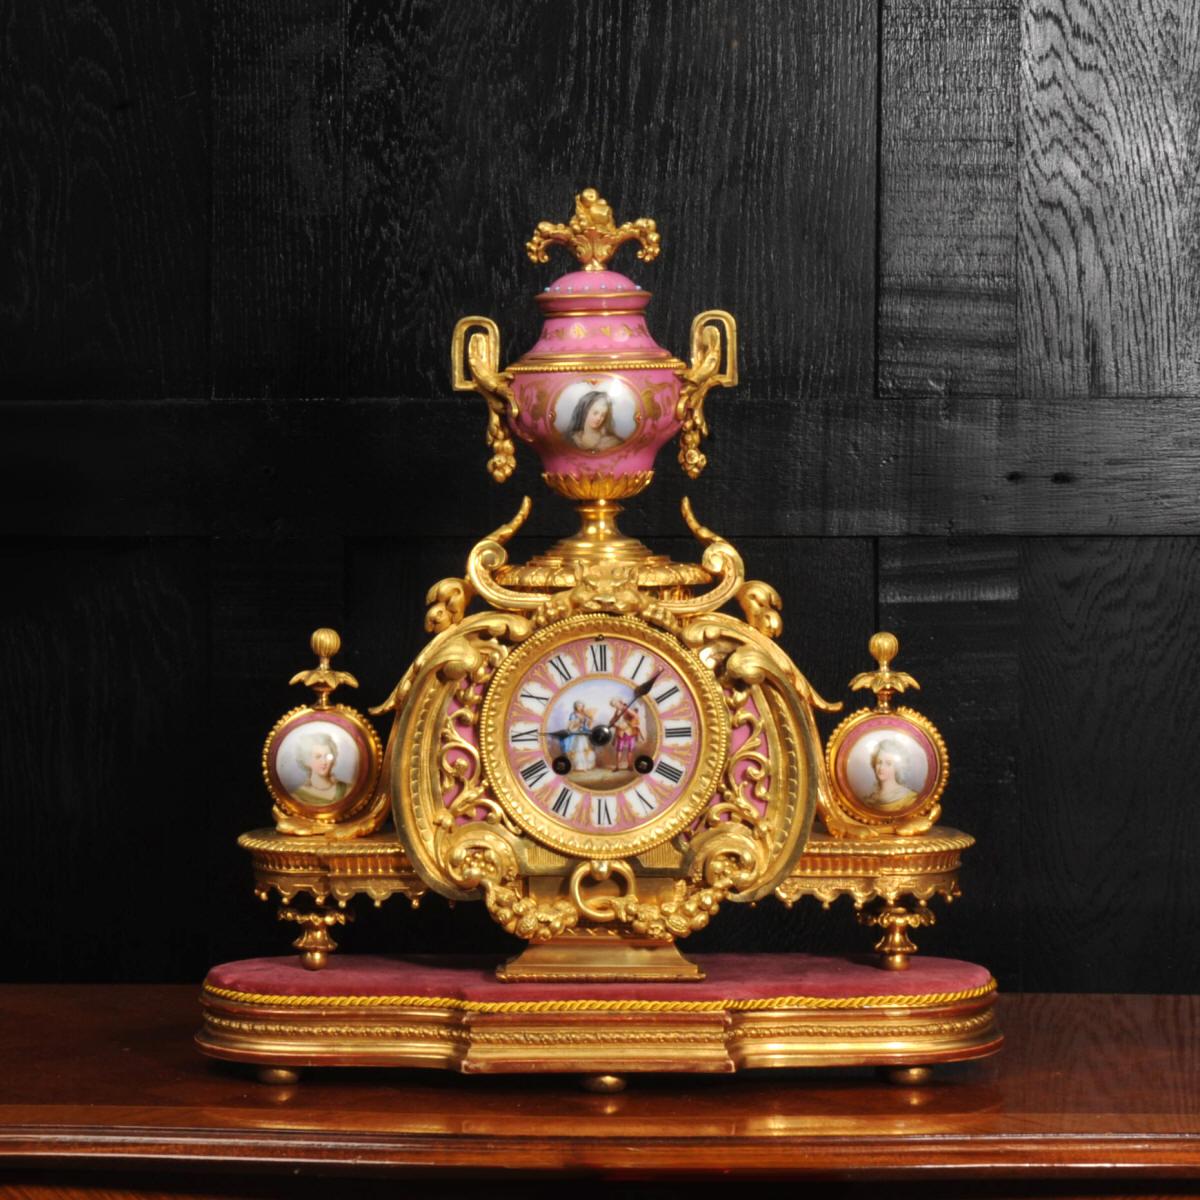 A magnificent ormolu (finely gilded bronze) and Sèvres style porcelain clock by renown maker Achille Brocot. It is mounted with delicately painted Sèvres style porcelain with a pompadour rose pink ground. The urn to the top features Marie Leczinska,